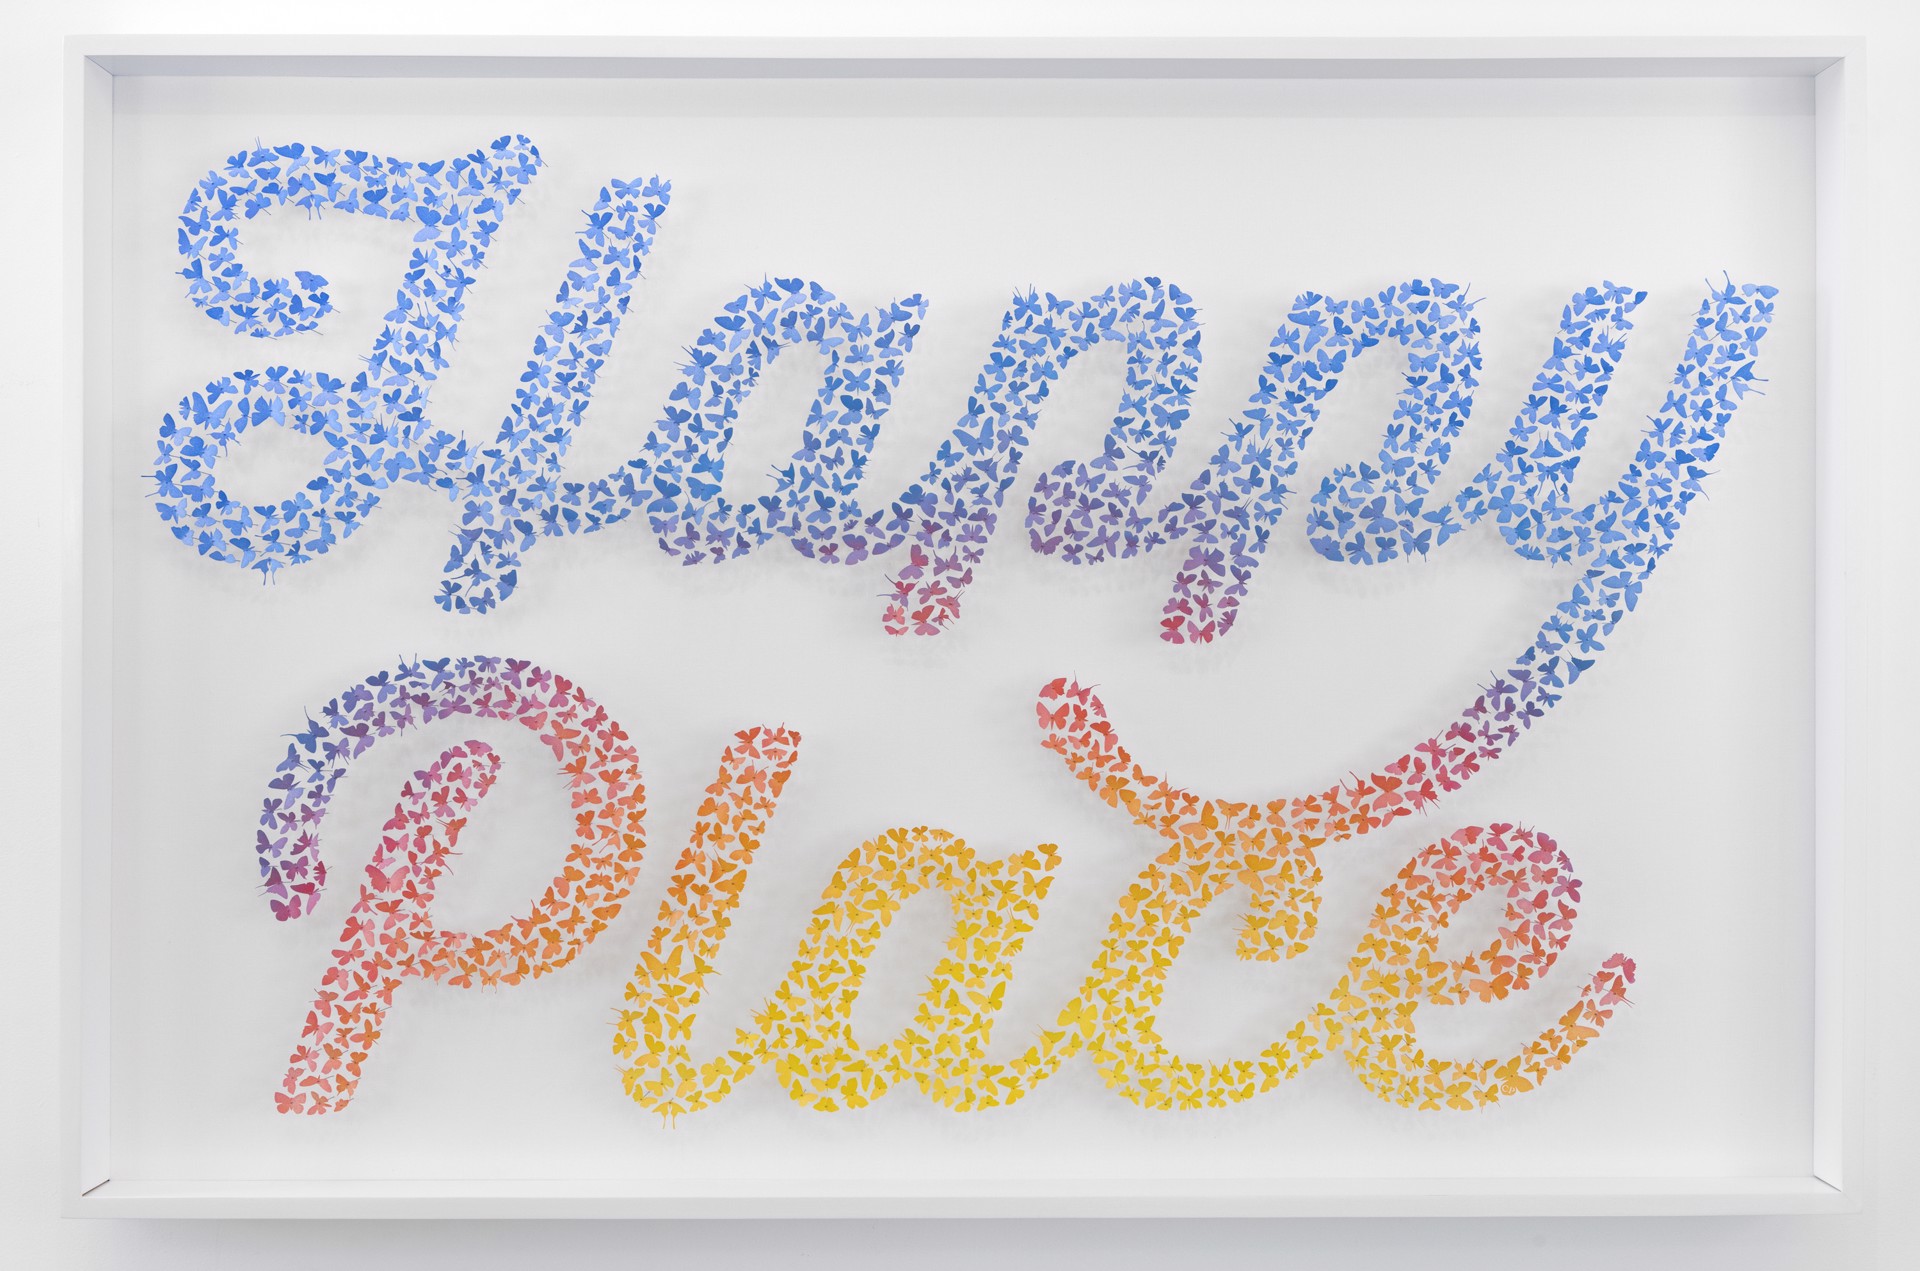 Find Yours (Happy Place) by Charles Patrick